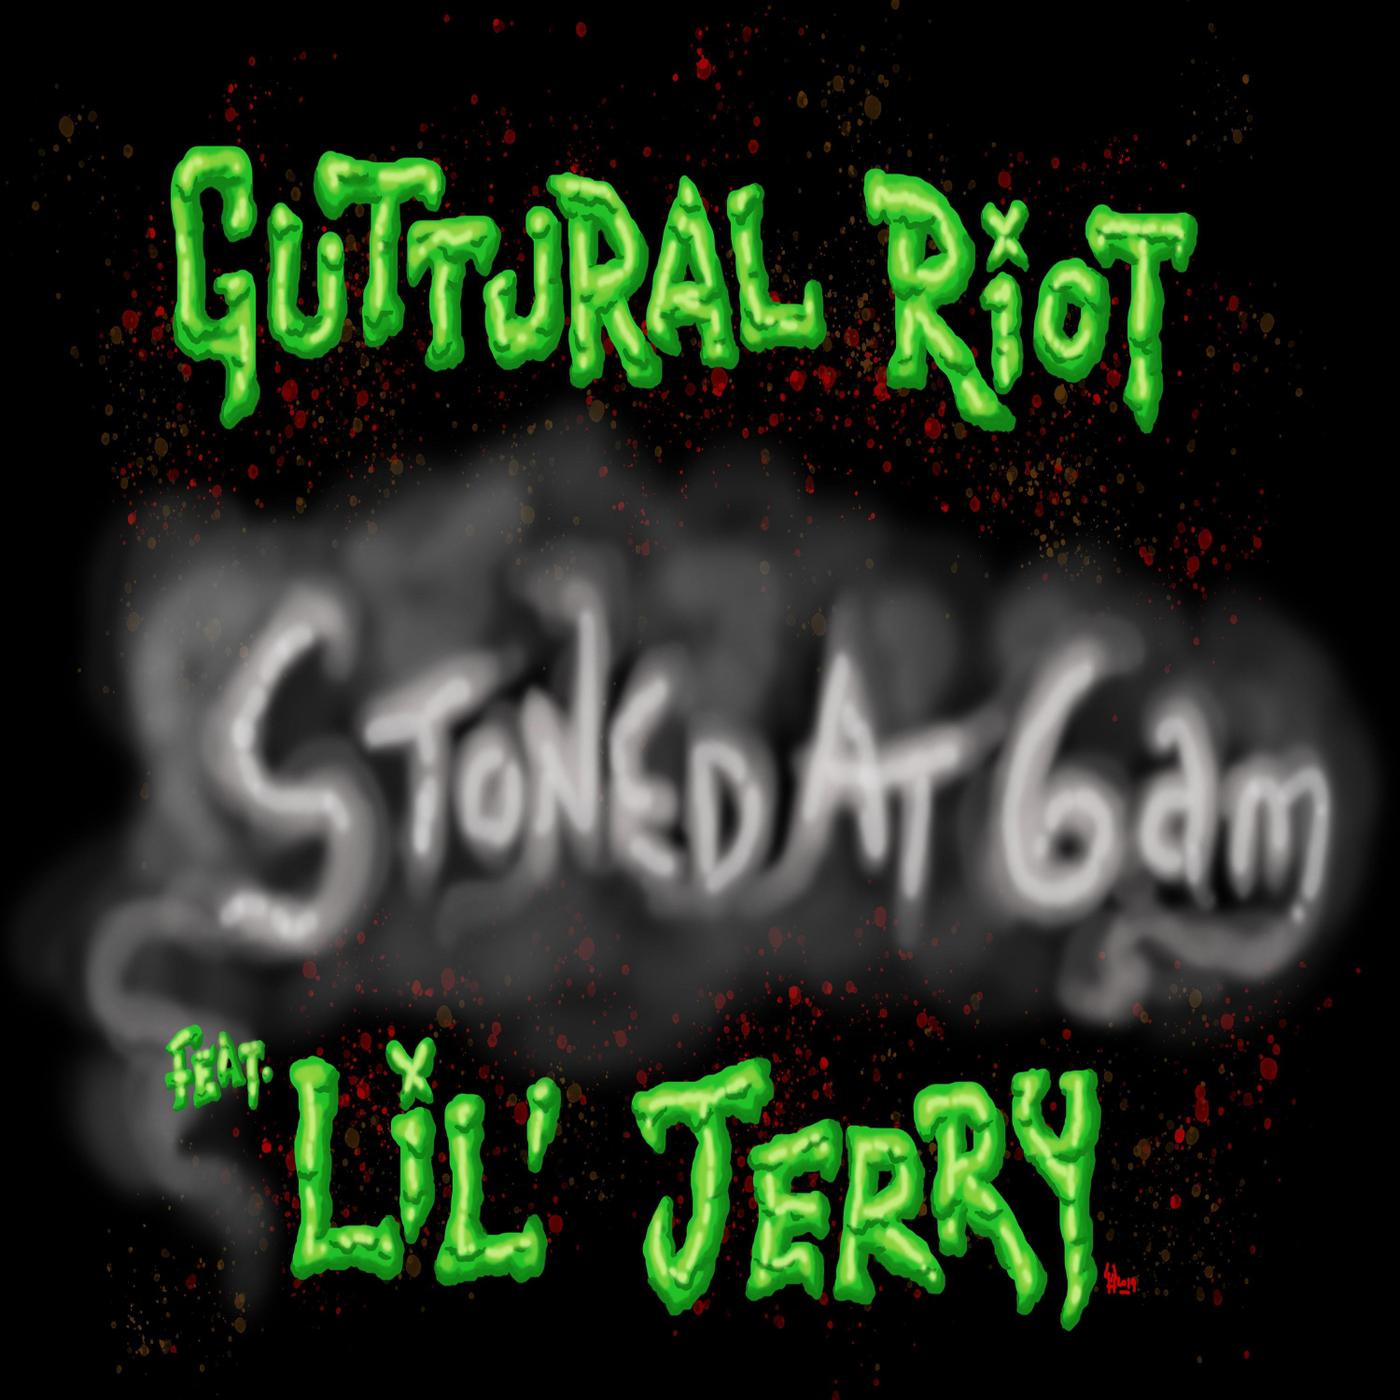 Guttural Riot - Stoned at 6AM (feat. Lil Jerry)